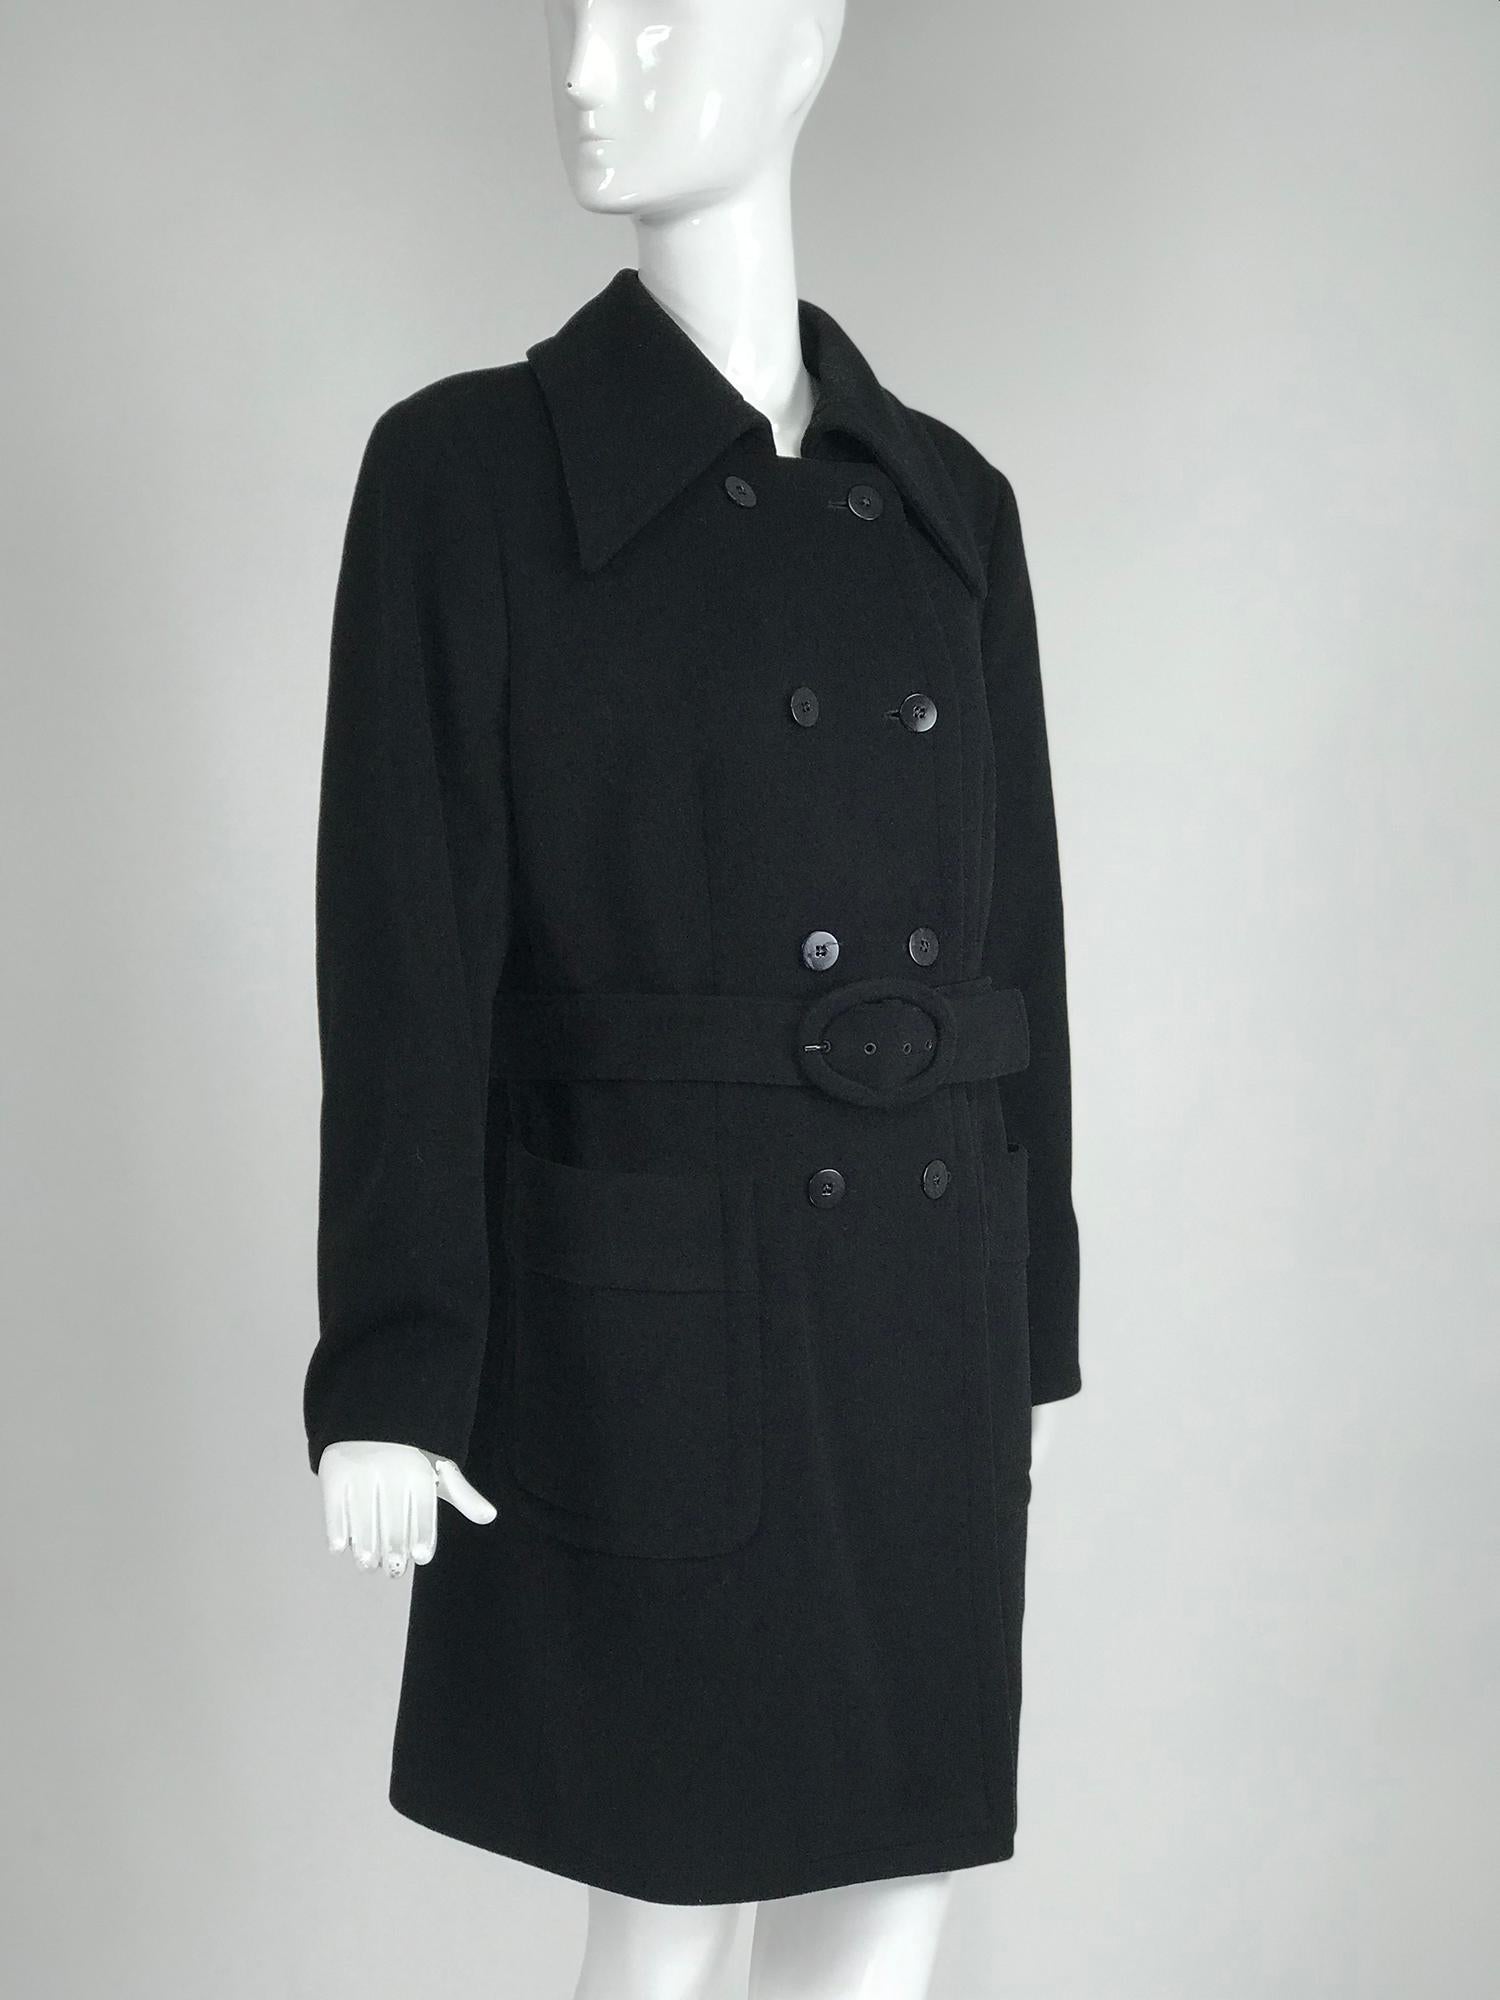 Giorgio Armani black wool double breasted belted coat with deep collar and hit front top stitched patch pockets. This beautiful coat has a self belt, the coat can be worn without the belt. Fully lined in black silky fabric. Princess seams. Center